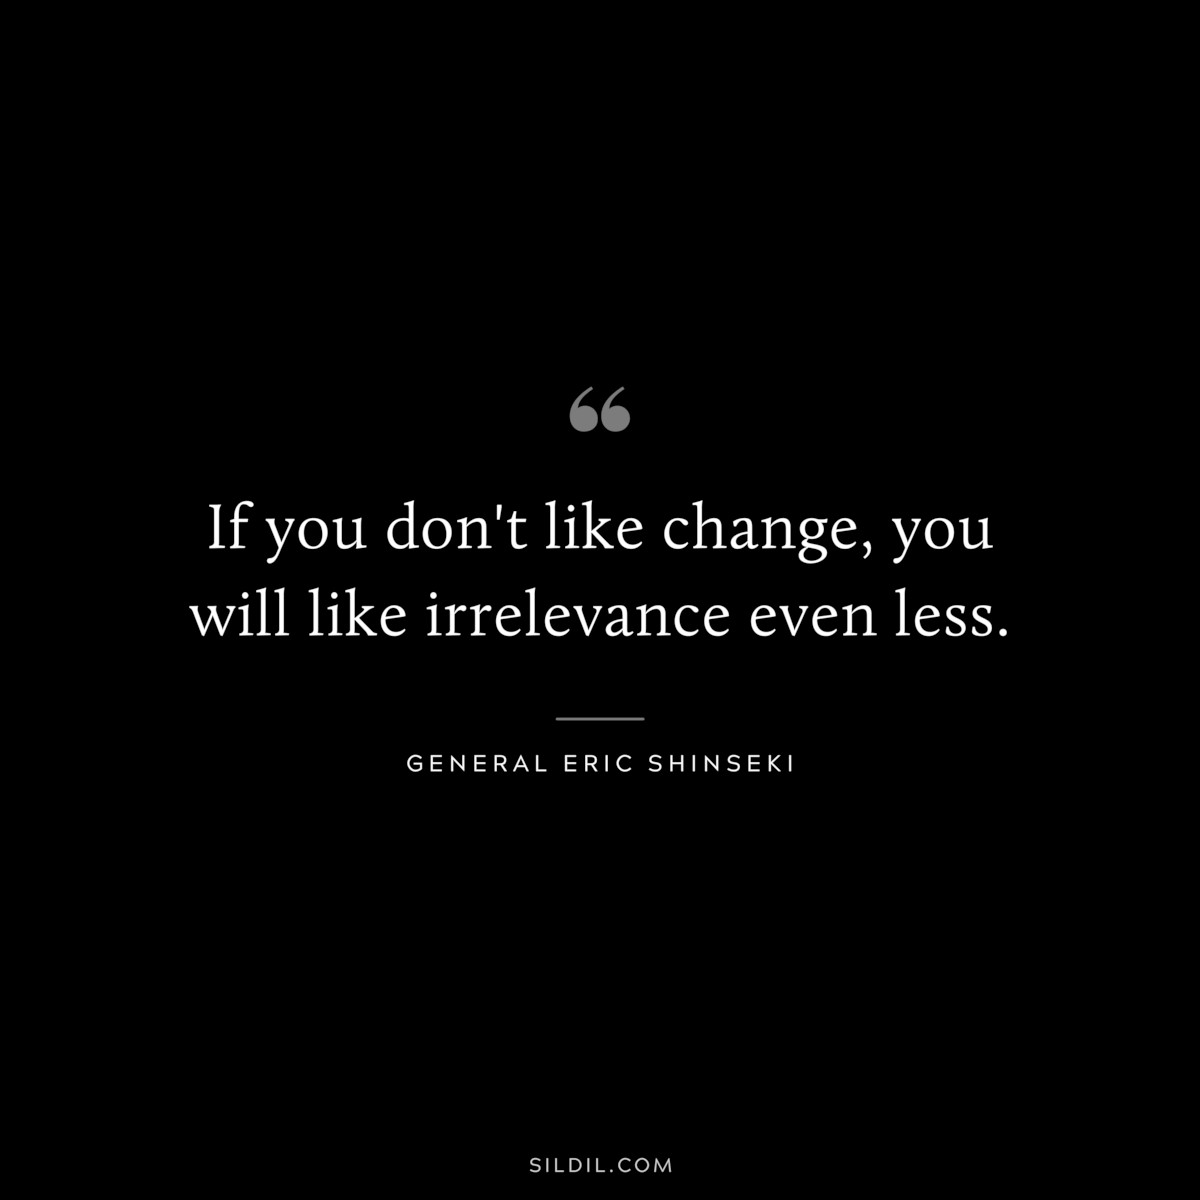 If you don't like change, you will like irrelevance even less. ― General Eric Shinseki